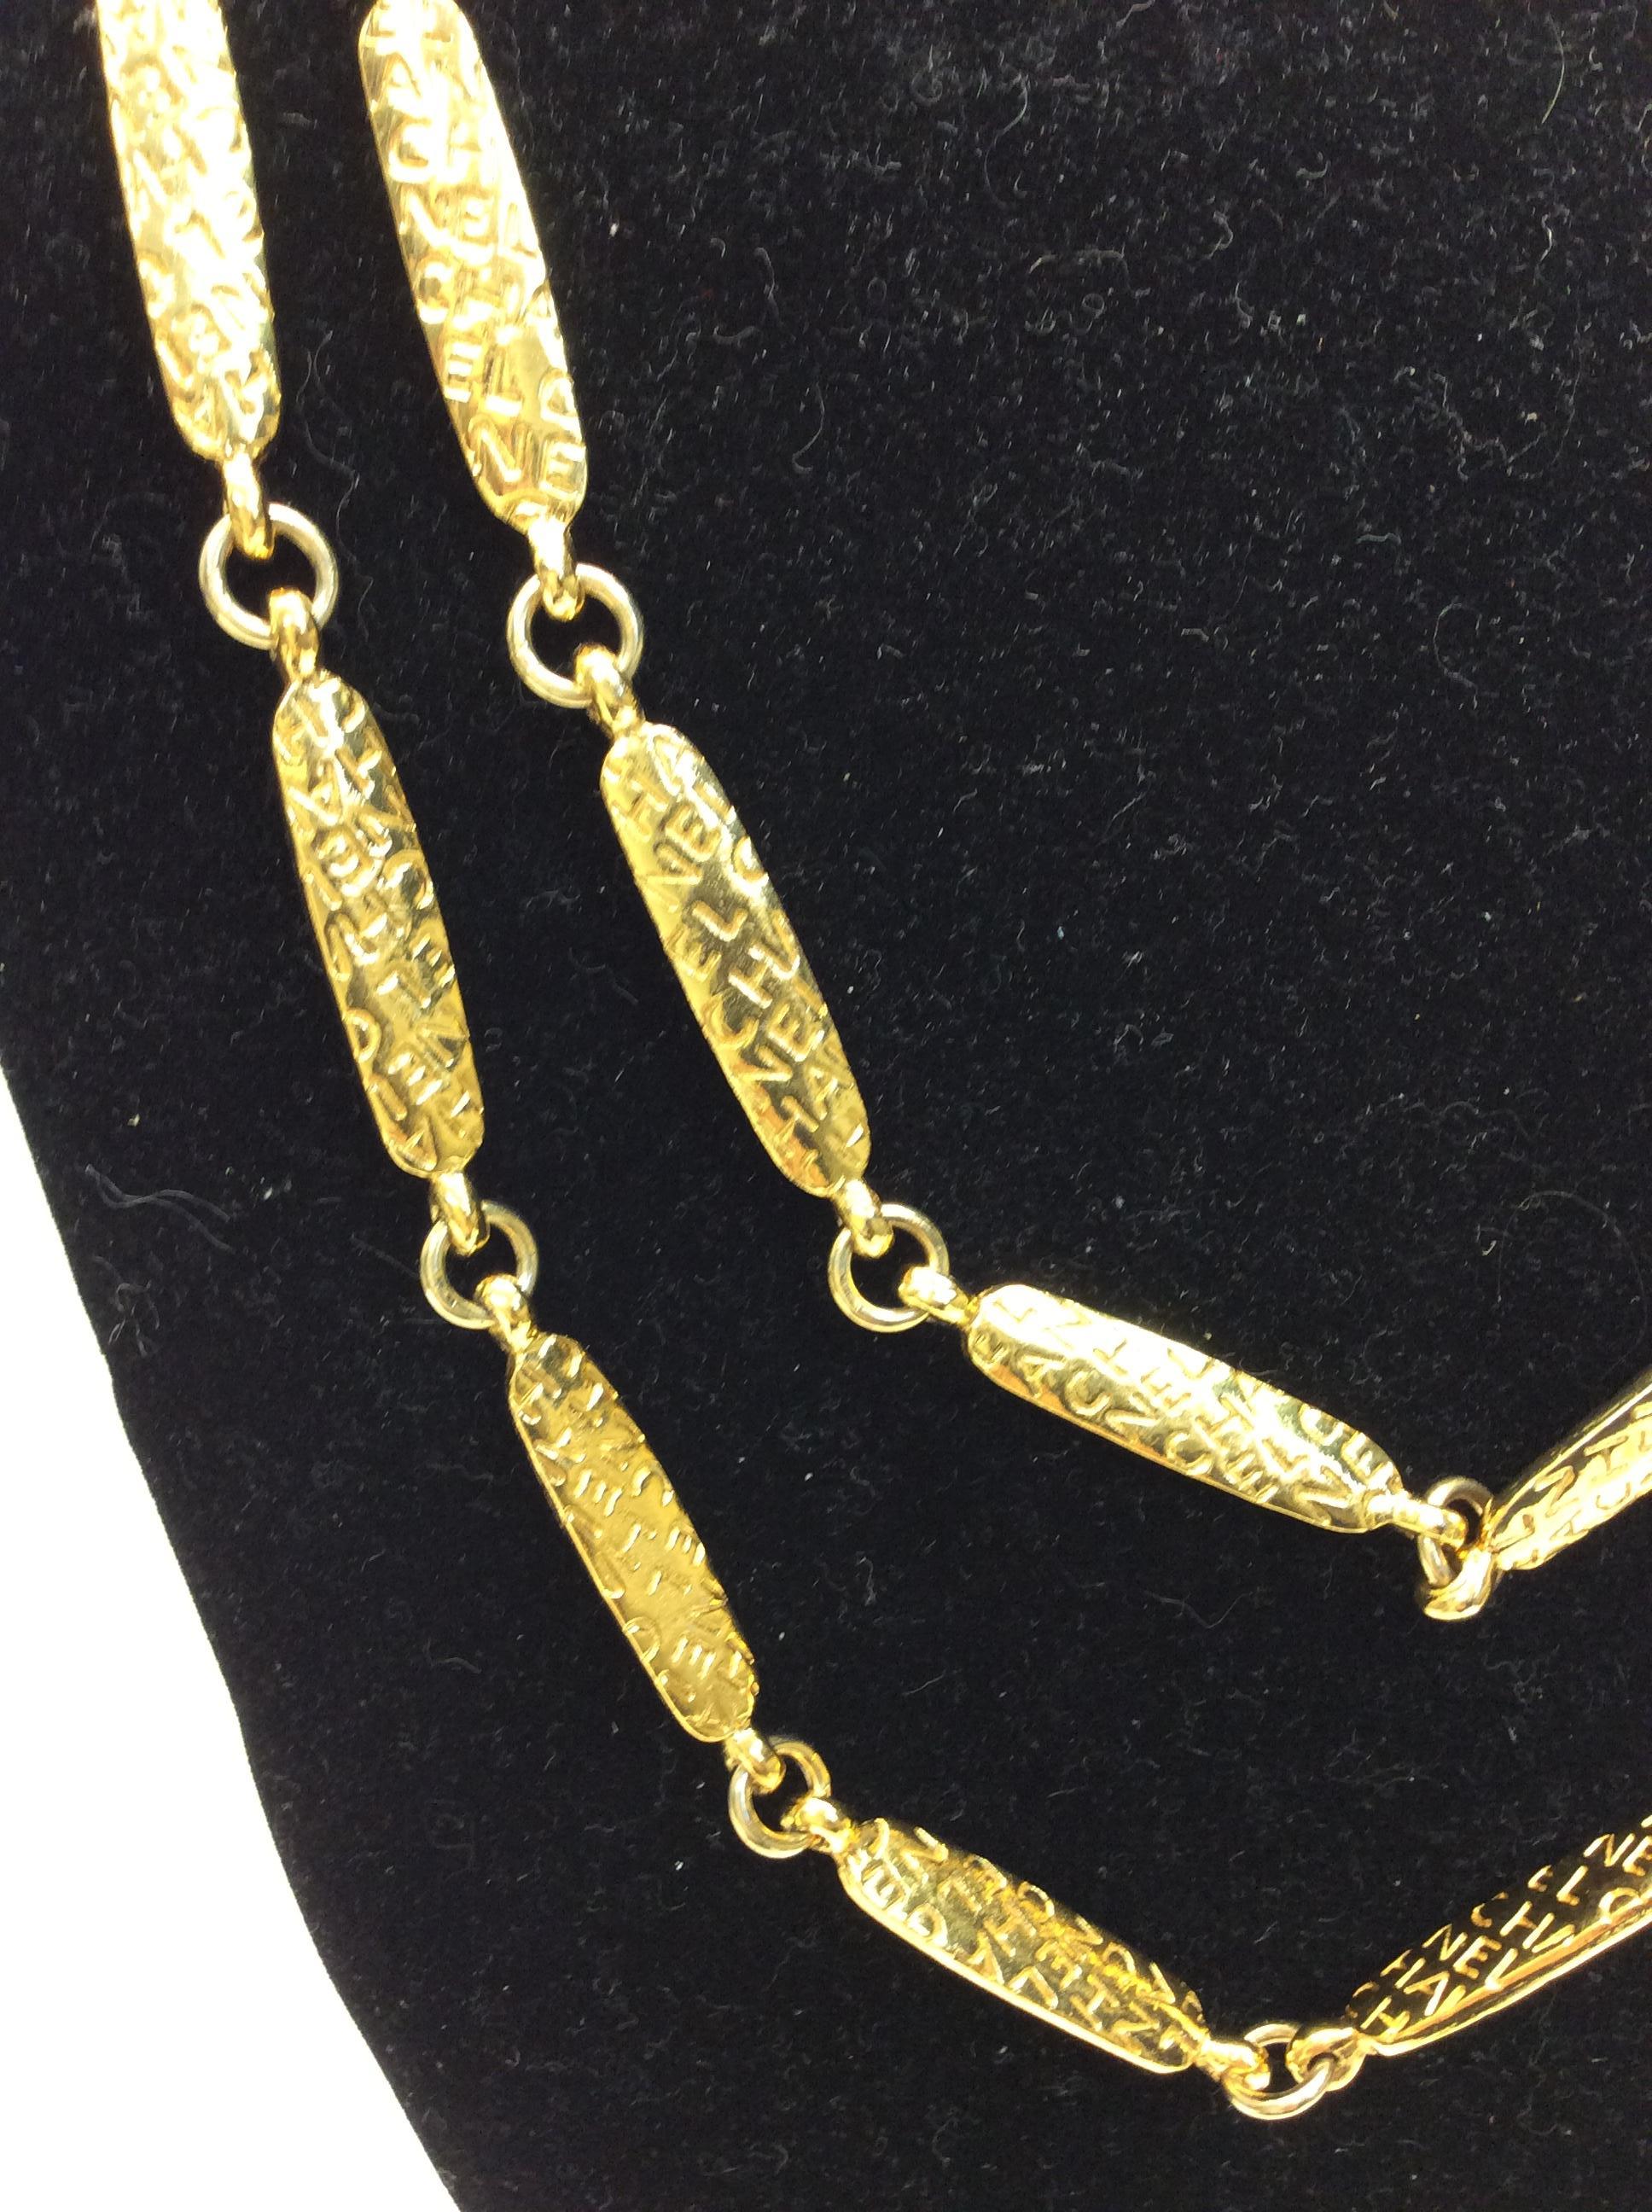 Chanel Gold Long Necklace
$399
Made in France
70